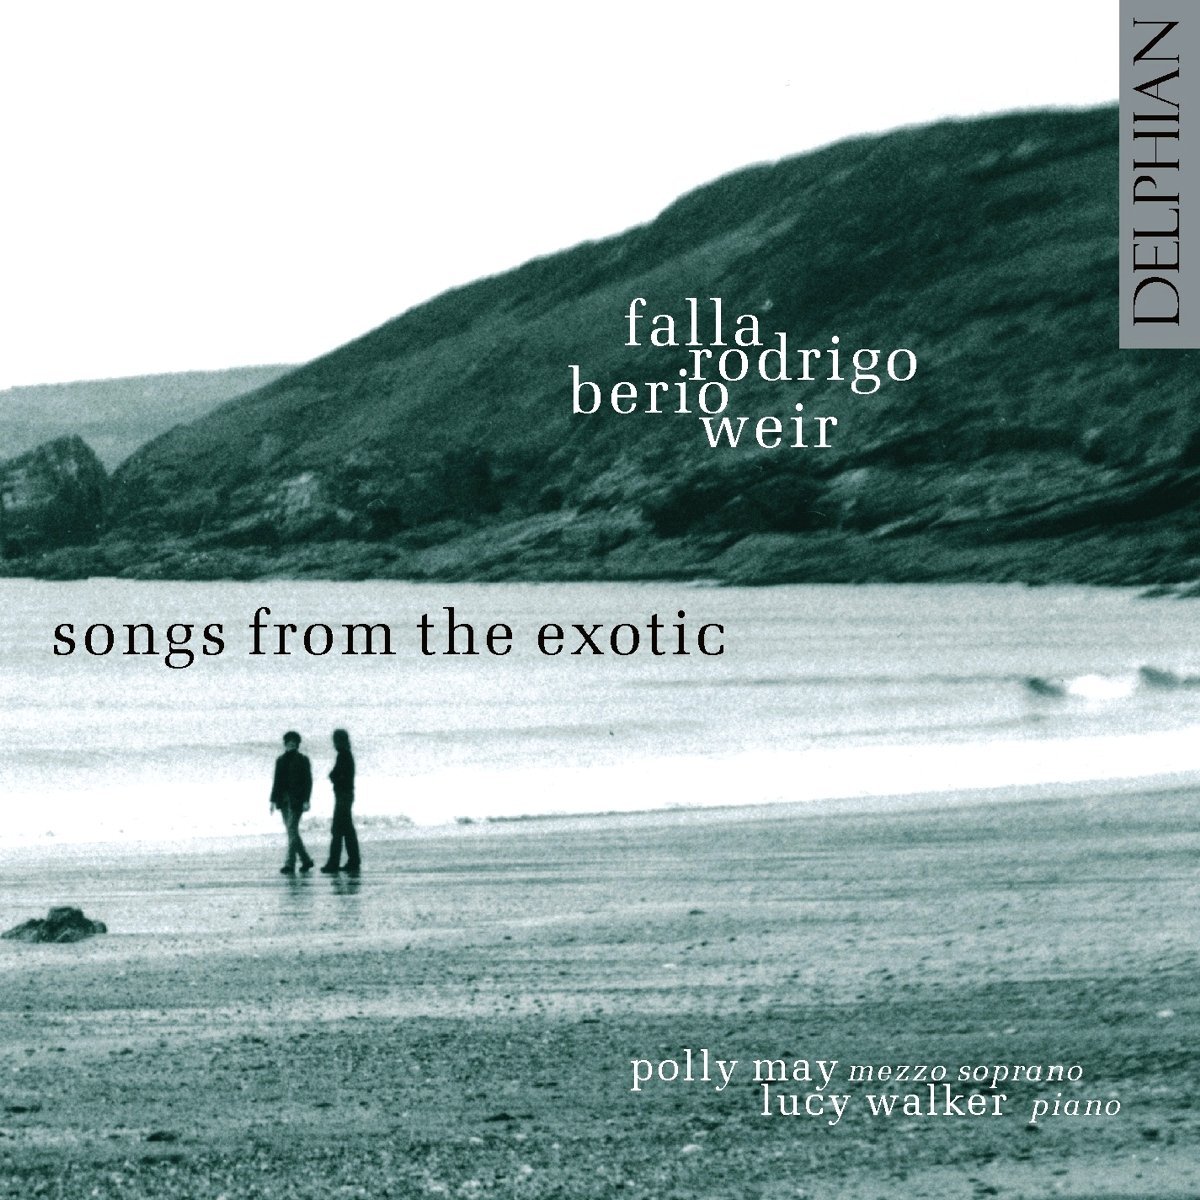 Songs from the Exotic CD Delphian Records